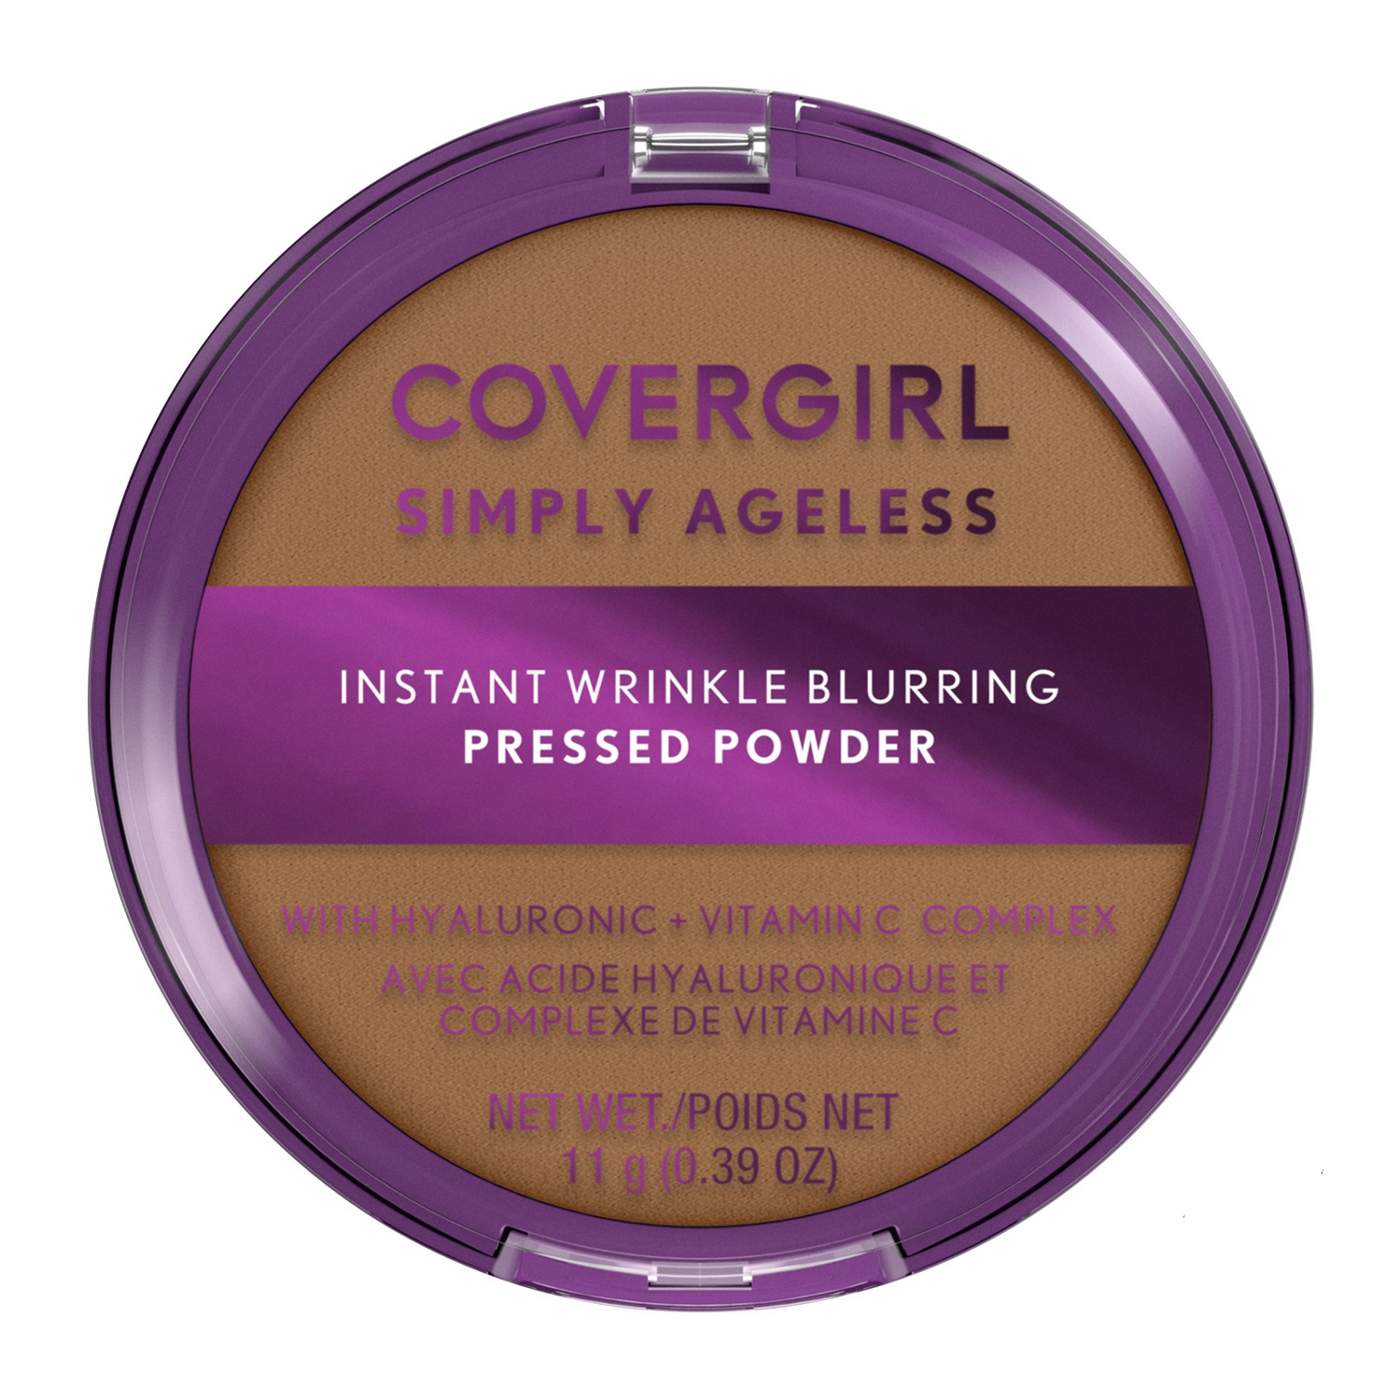 Covergirl Simply Ageless Pressed Powder 265 Tawny; image 1 of 10